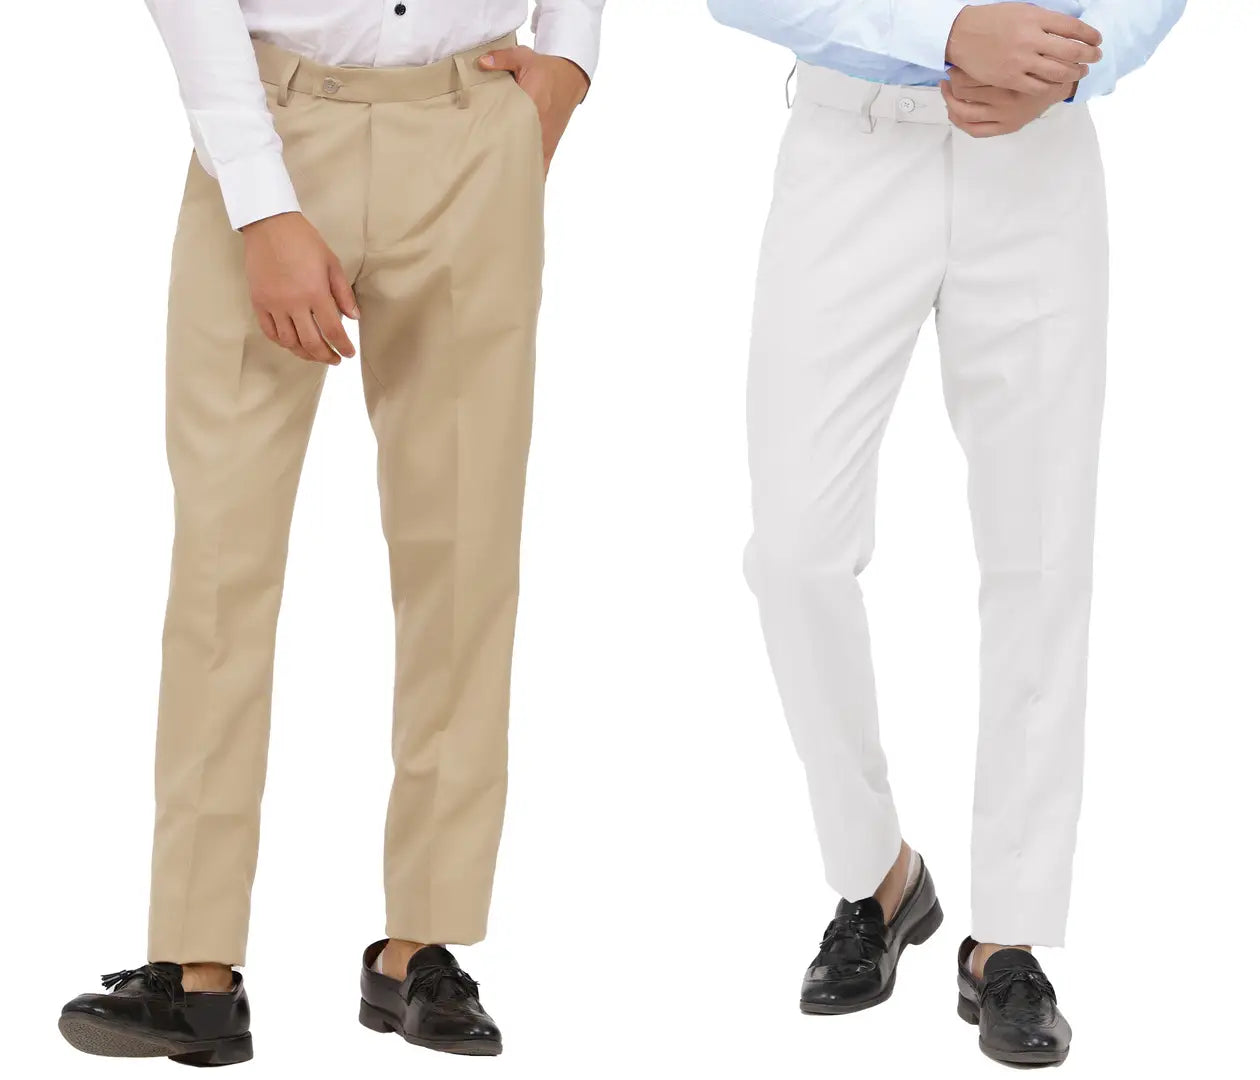 Kundan Men Poly-Viscose Blended Beige and White Formal Trousers ( Pack of 2 Trousers )